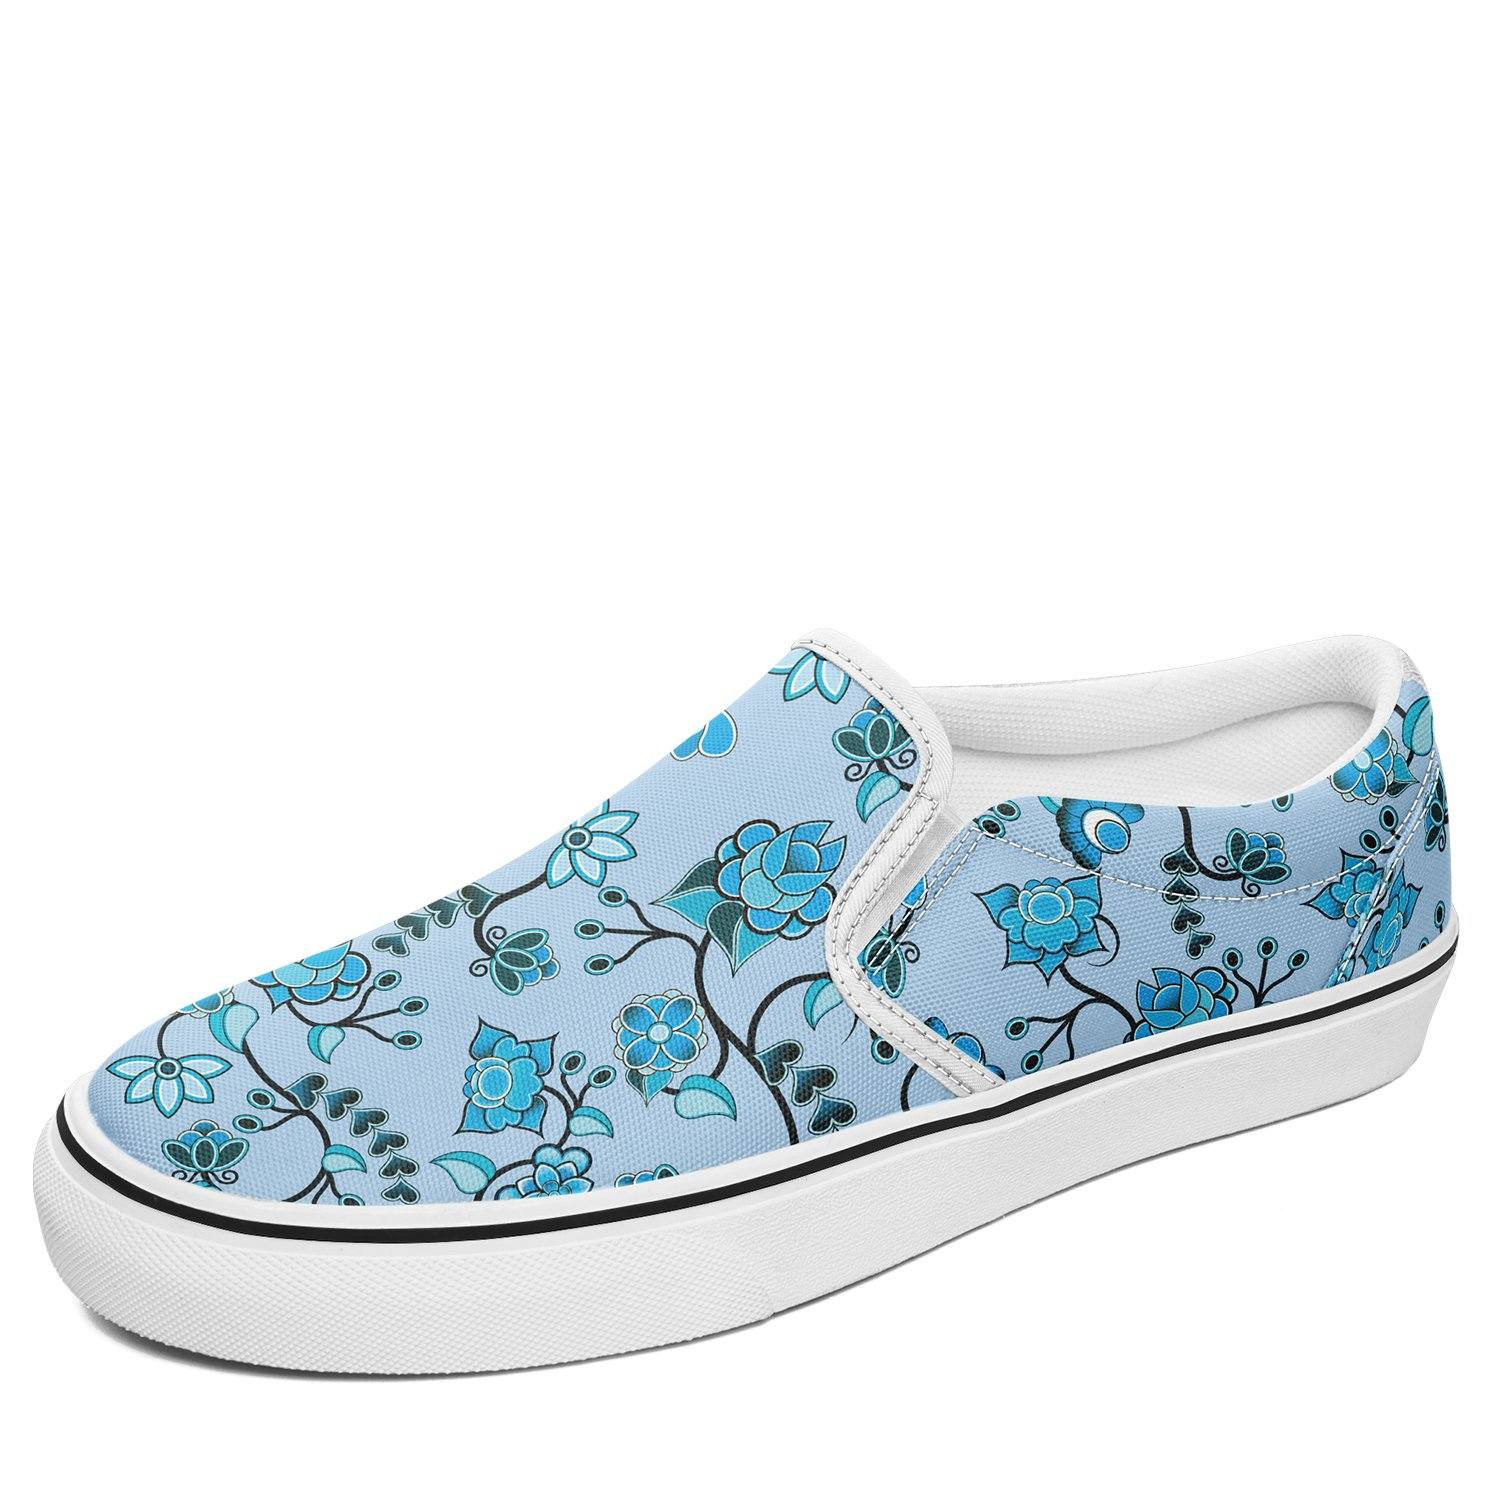 Blue Floral Amour Otoyimm Canvas Slip On Shoes otoyimm Herman US Youth 1 / EUR 32 White Sole 